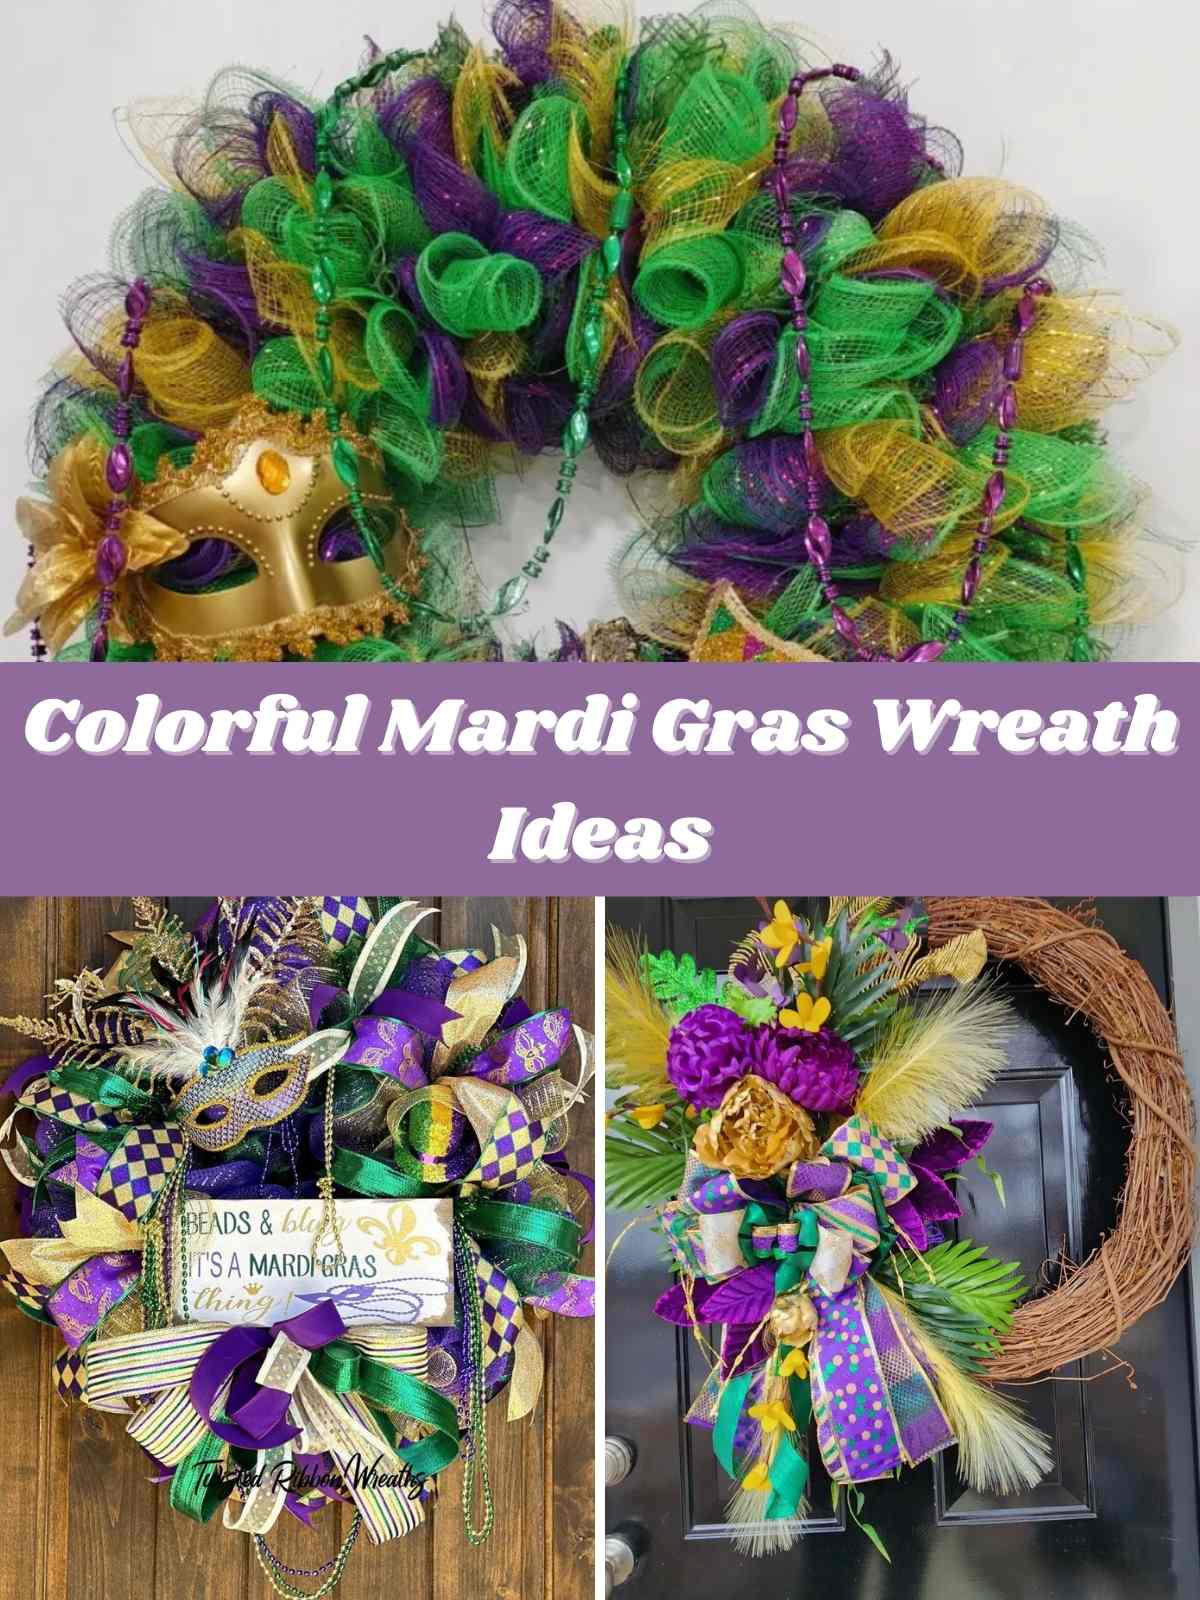 3 different examples New Orleans wreaths, all of them have green, purple and gold.